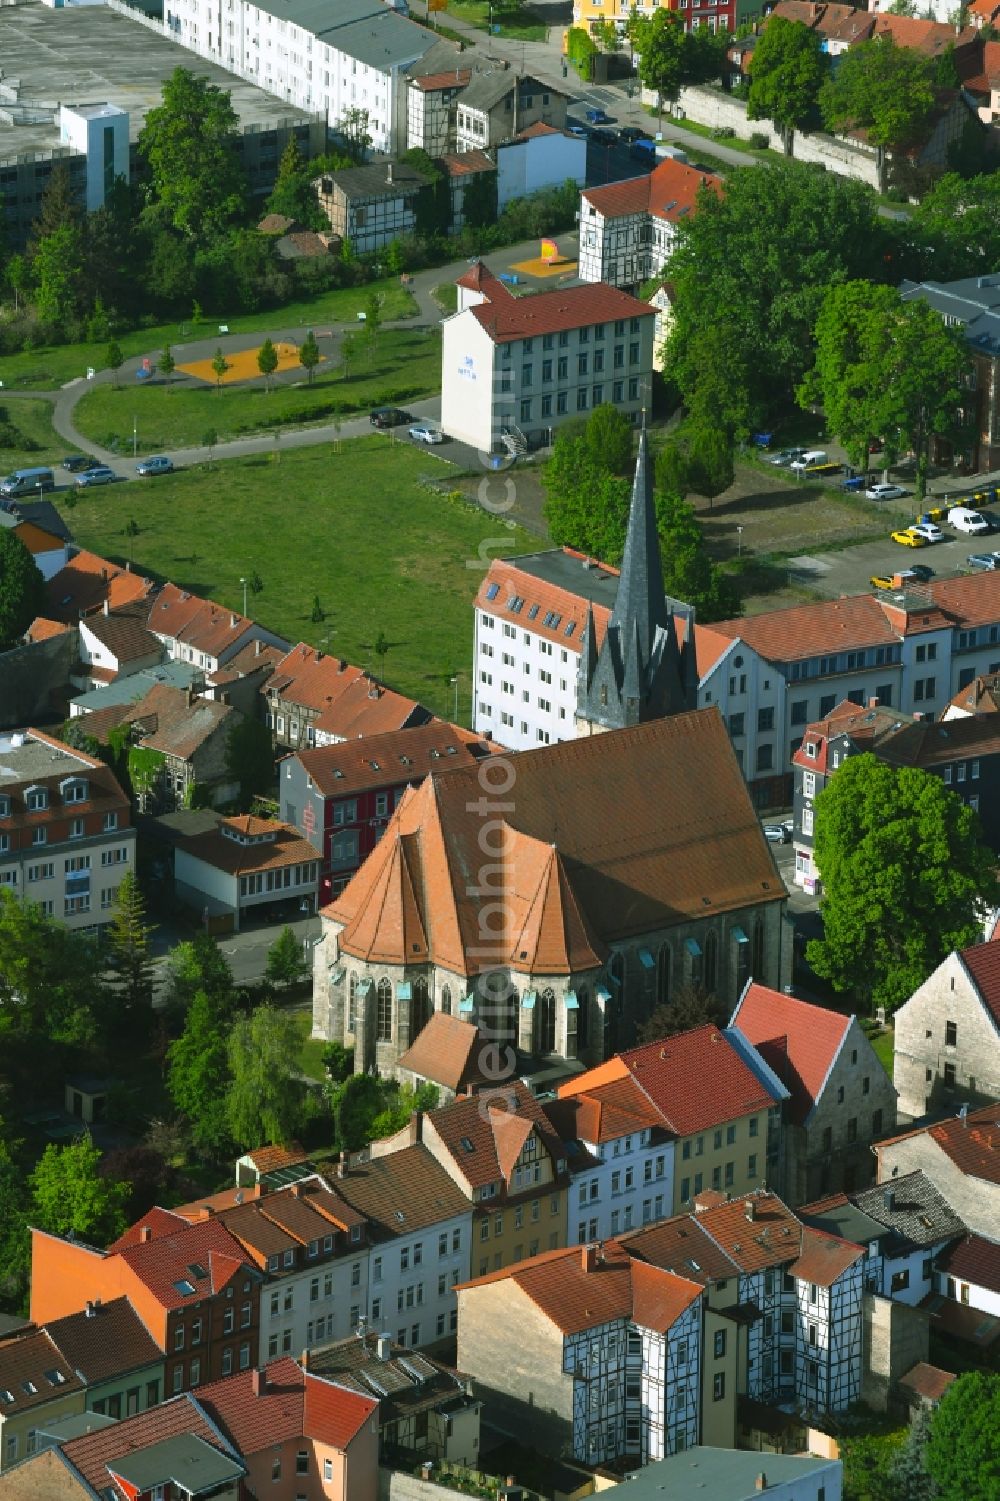 Aerial image Mühlhausen - Church building in St. Josef - roemisch-katholische Pfarrkirche Old Town- center of downtown in Muehlhausen in the state Thuringia, Germany